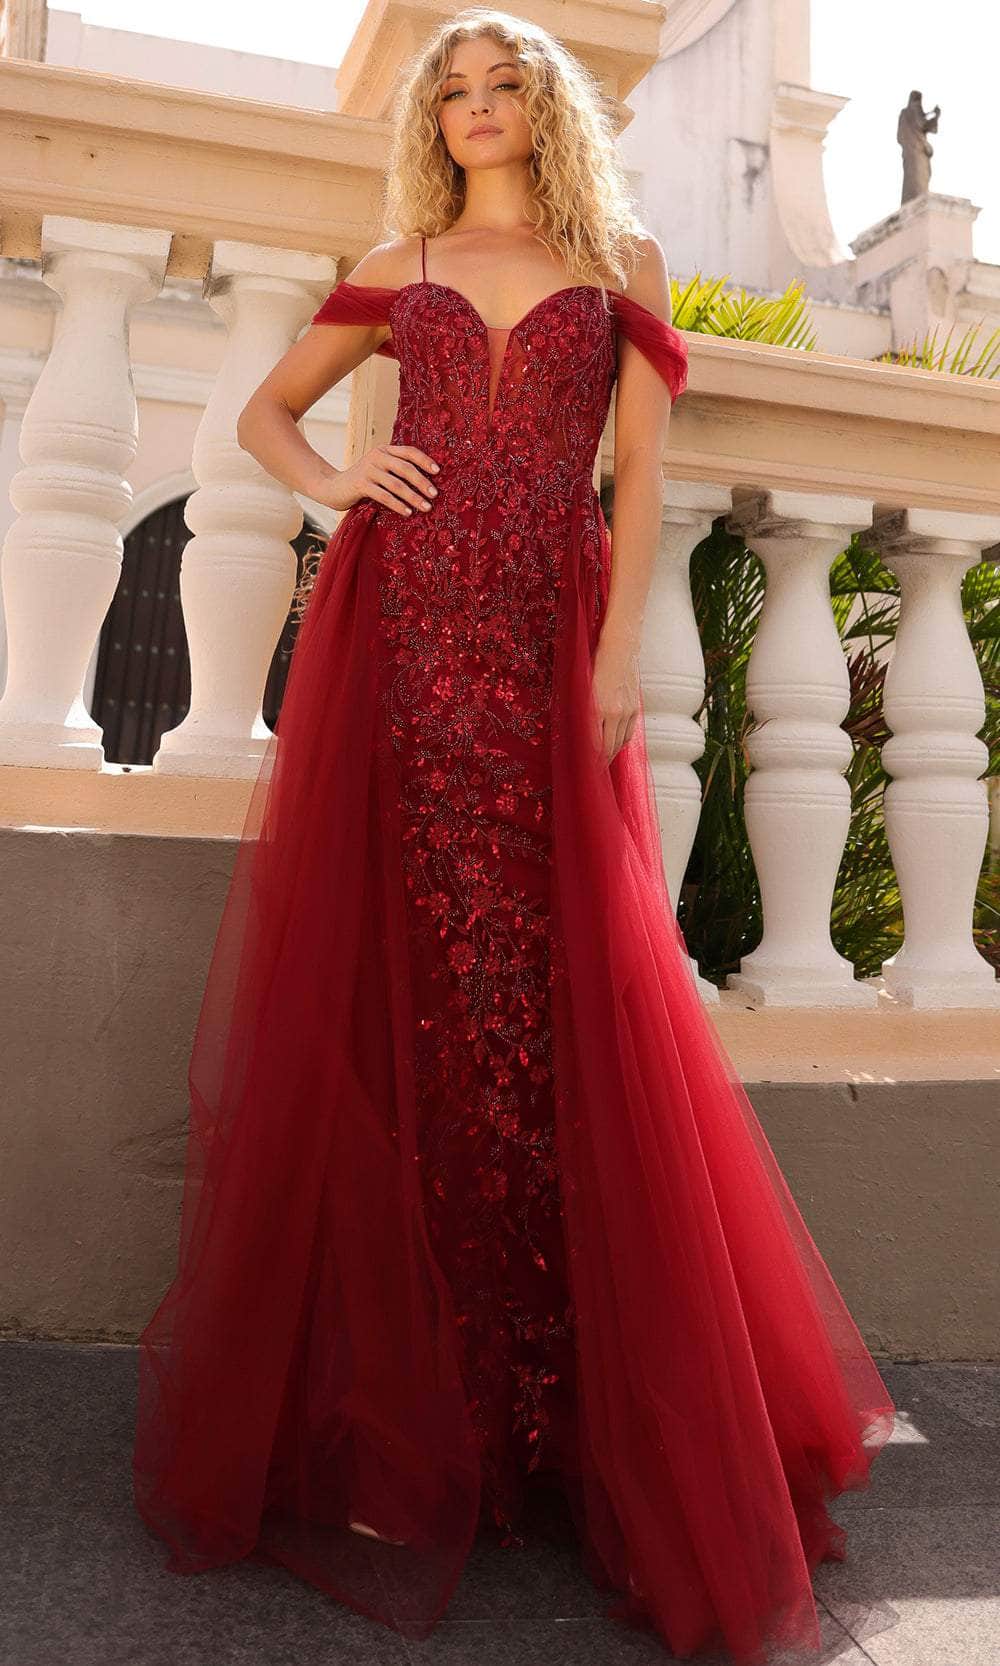 Nox Anabel L1362 - Floral Embroidered Plunging Neck Gown Prom Dresses 4 / Burgundy